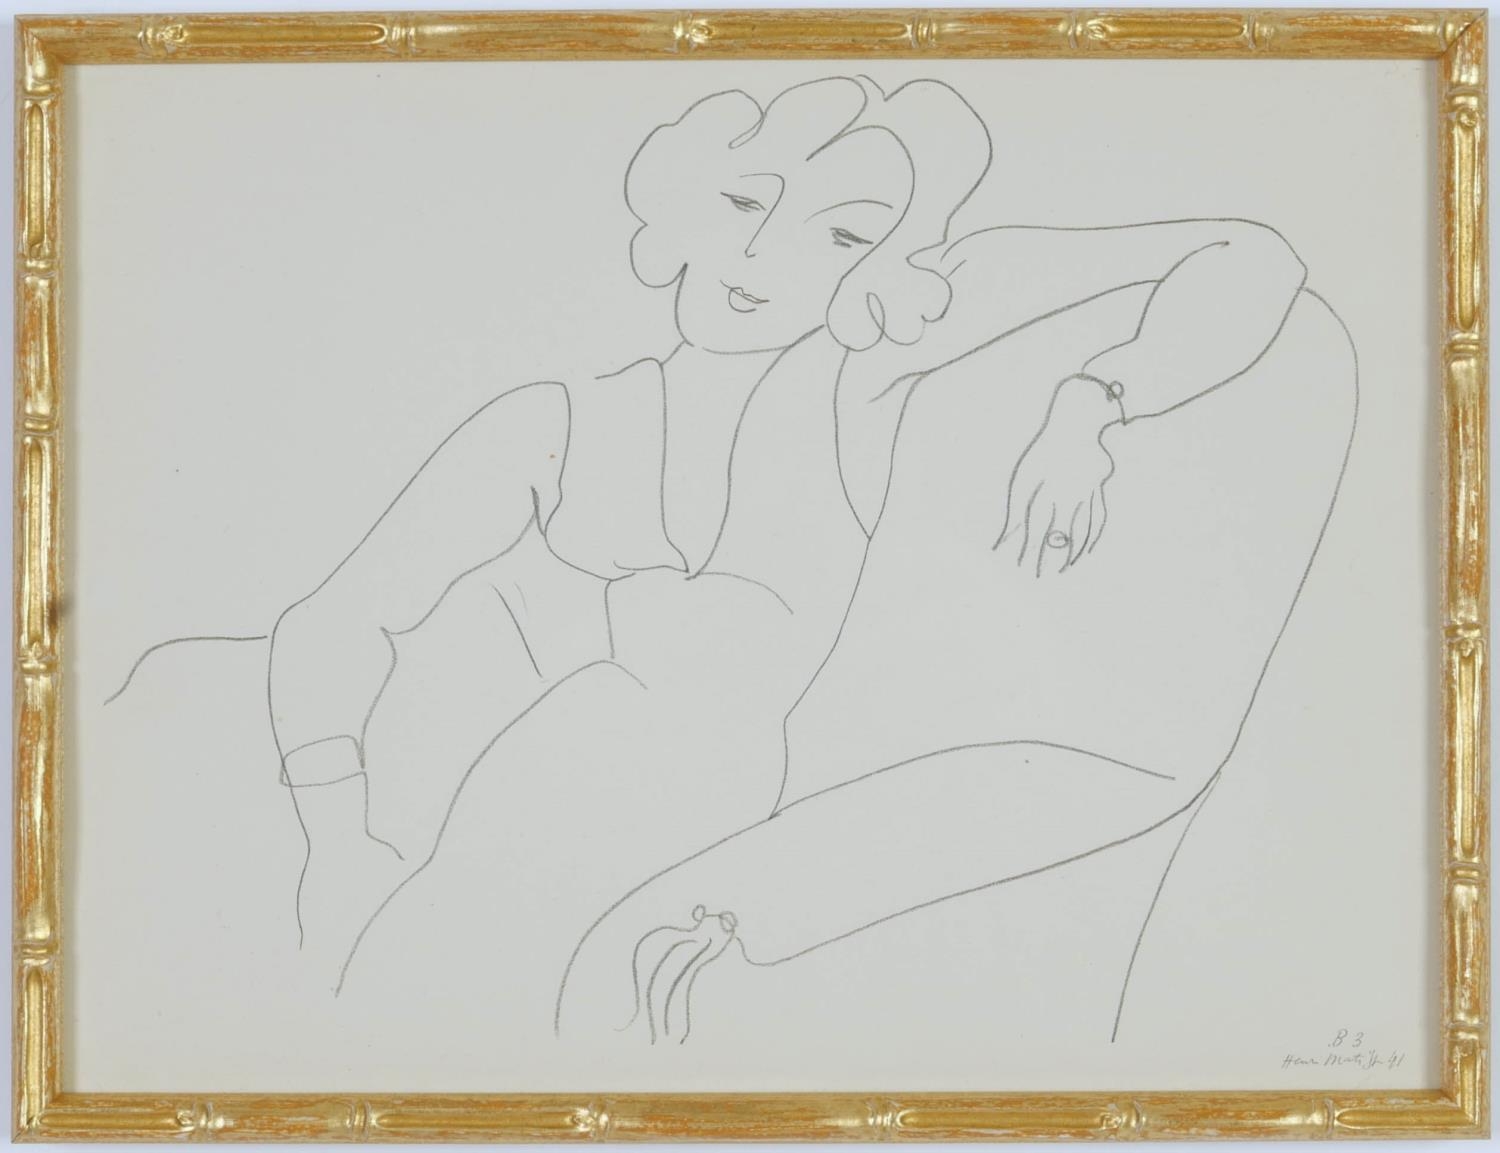 HENRI MATISSE, collotype B3, edition 950, suite Themes and Variations 1943, printed by Martin